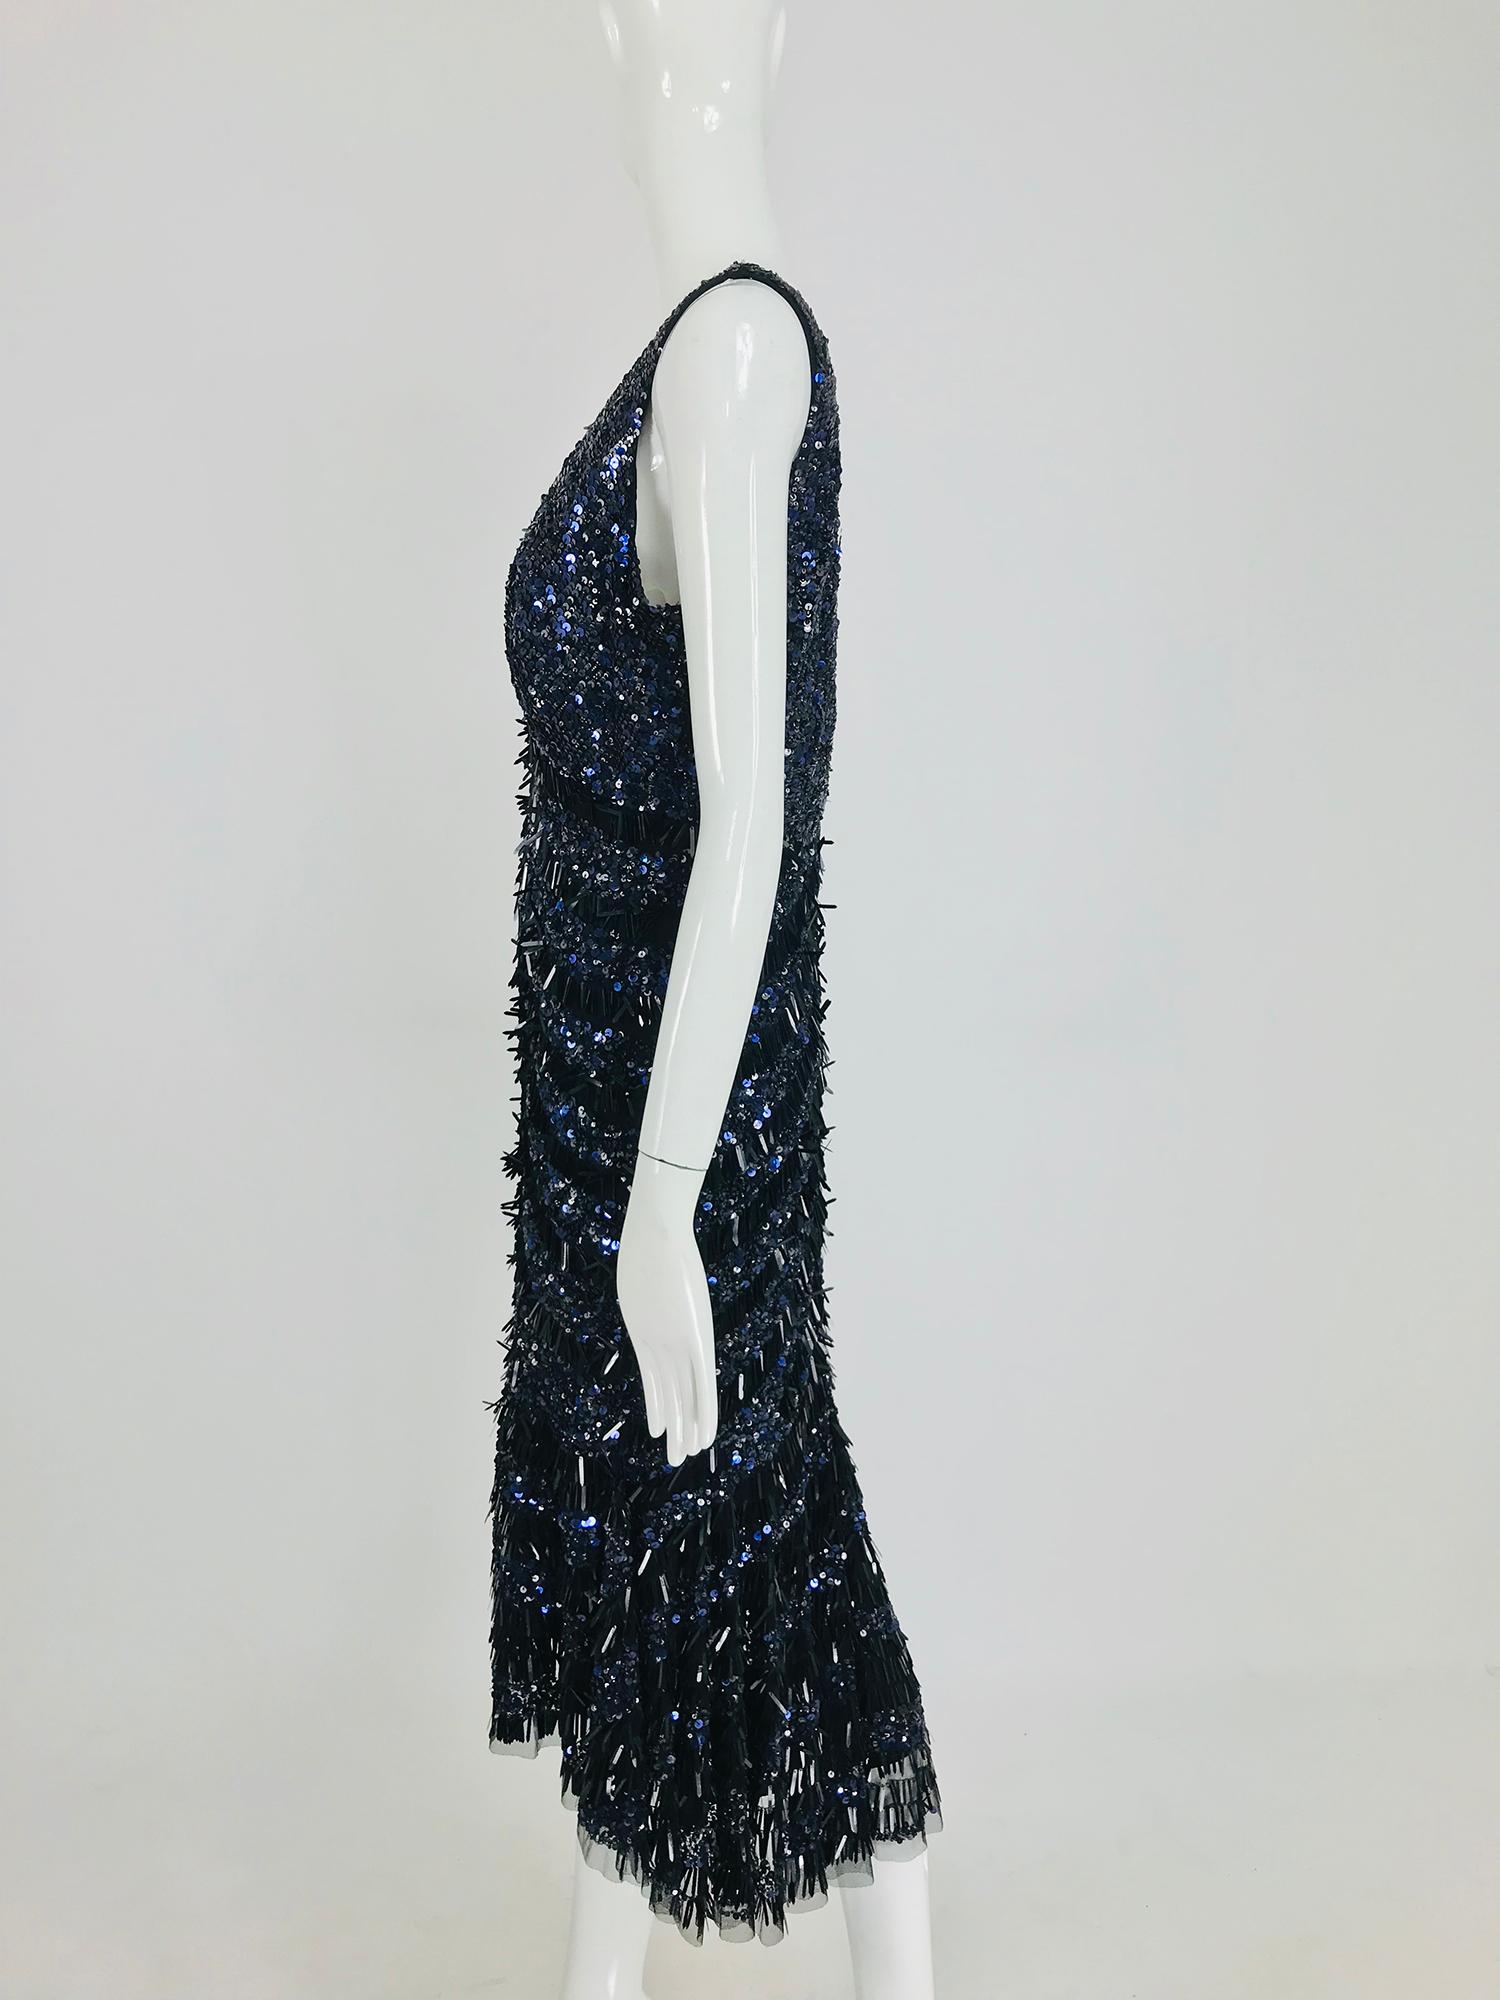 Theia Sequin Evening Cocktail Dress in Black and Blue 12 10